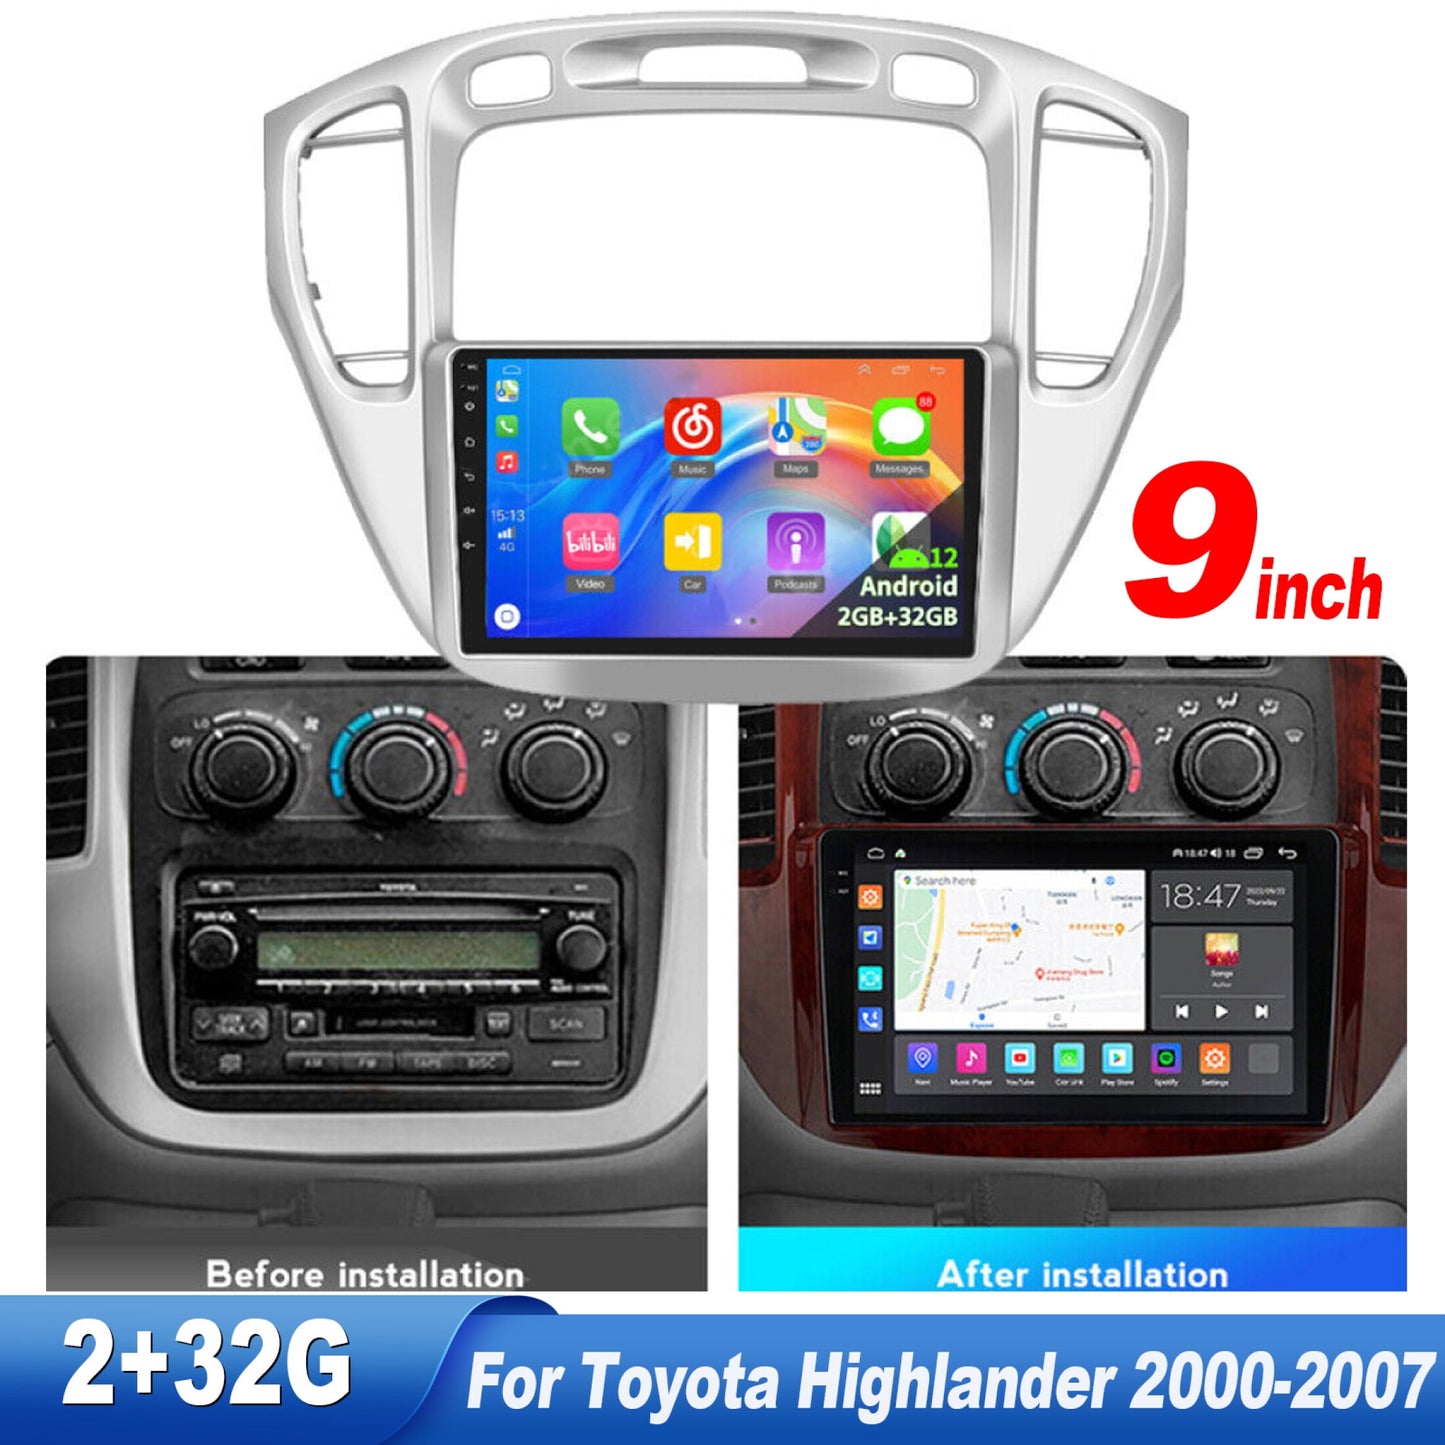 Zcargel Android 12 Car Stereo for Toyota Highlander 2000-2007 with Canbus Wireless Carplay and Android Auto 9 inch Touchscreen Radio Bluetooth GPS WiFi Hi-Fi + Backup Camera Mic 2+32G